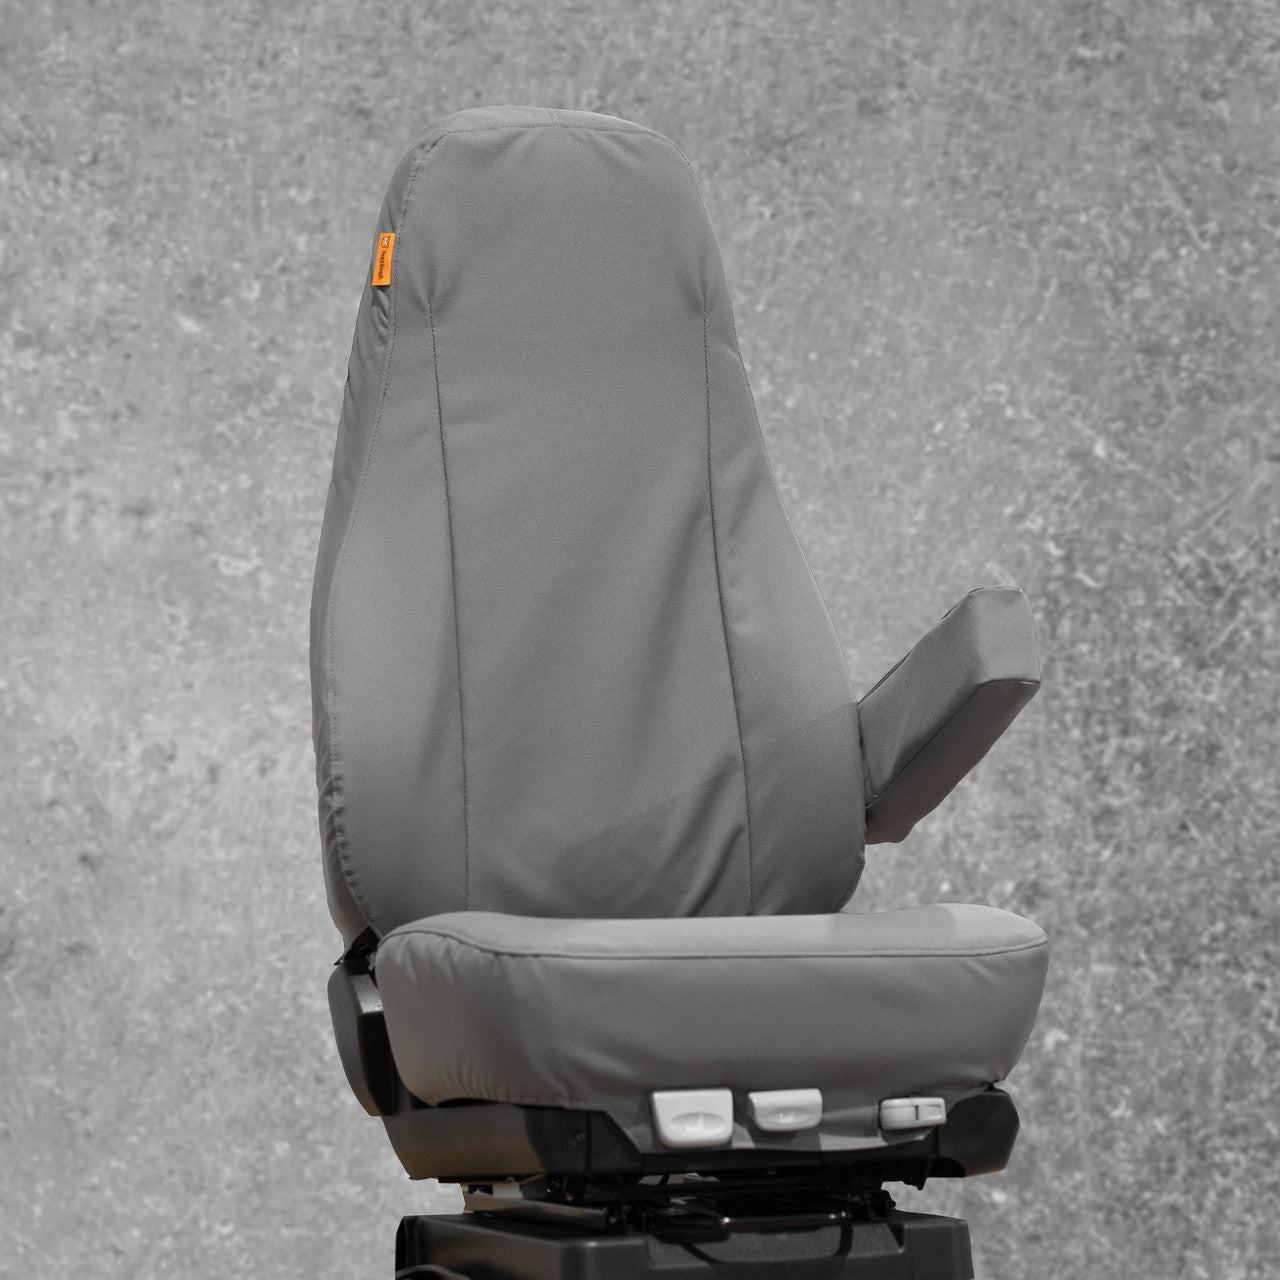 ISRI seat cover, all American made from ultra-durable Cordura fabric